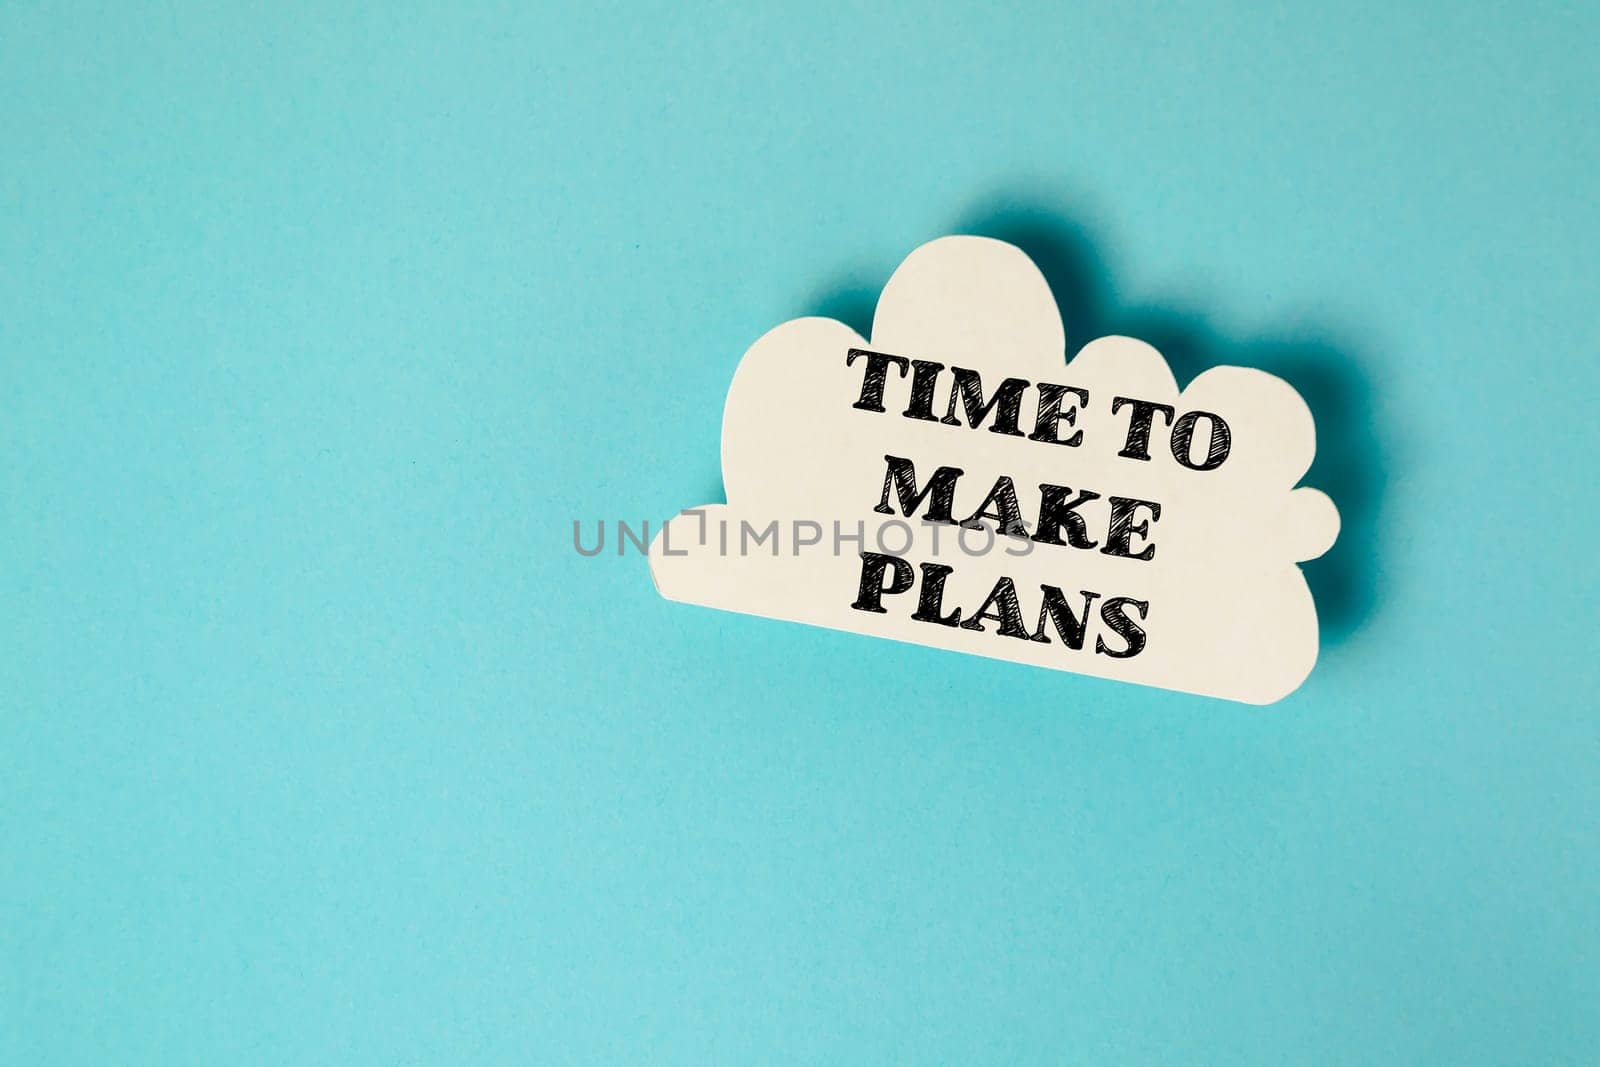 A cloud with the words "Time to make plans" written on it. Concept of urgency and the importance of taking action